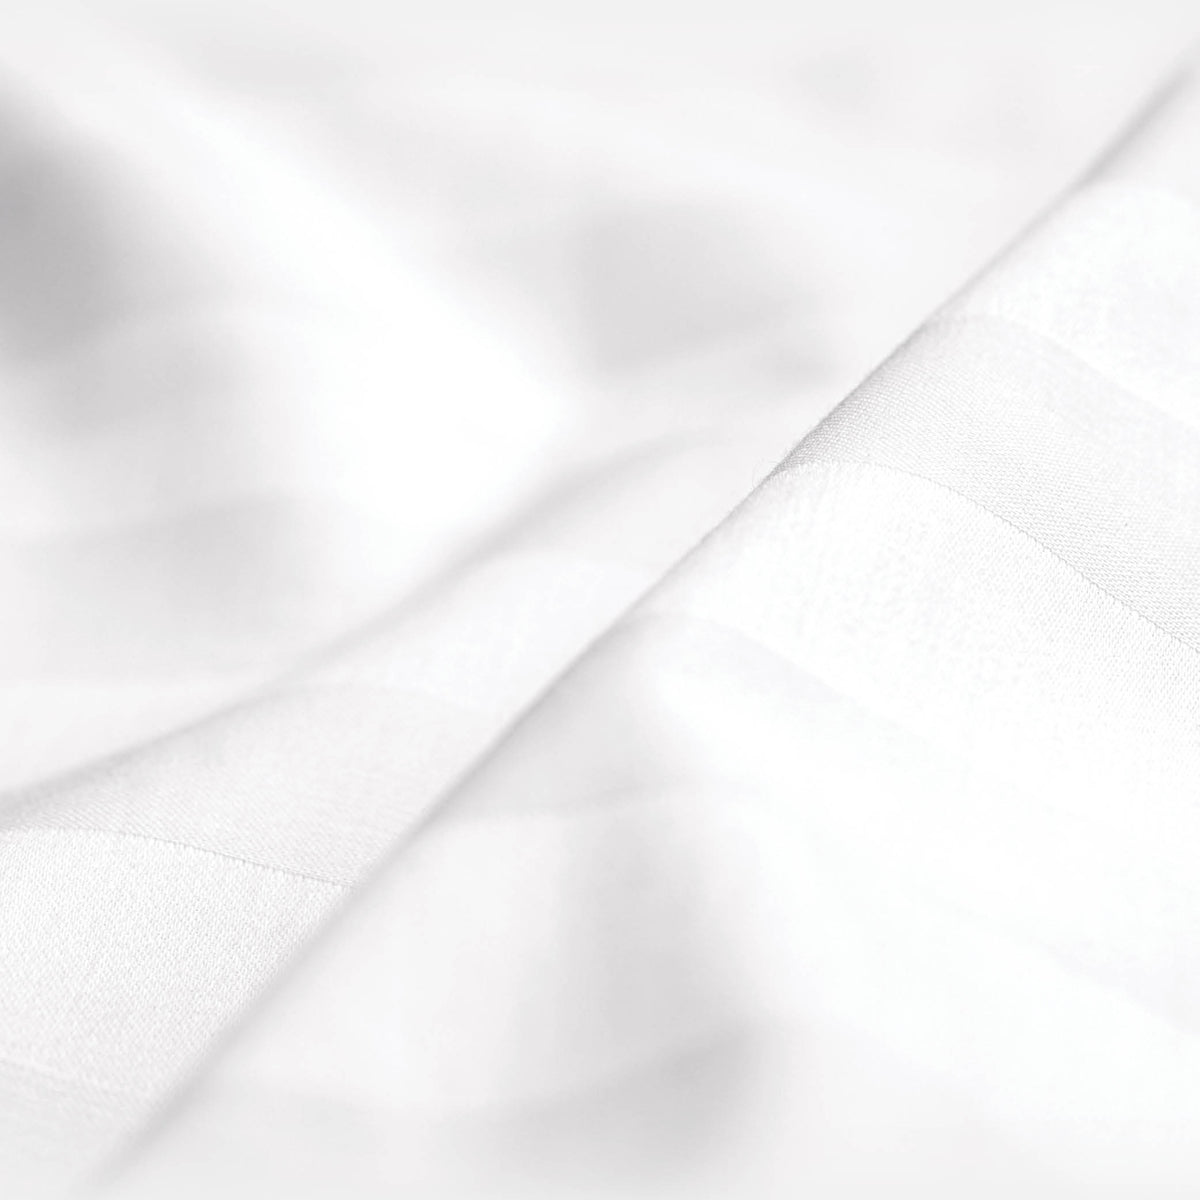 Close-up image of the Luxury Resort Hotel Collection Classic Cotton Sheet Set showcasing the white pinstripe pattern